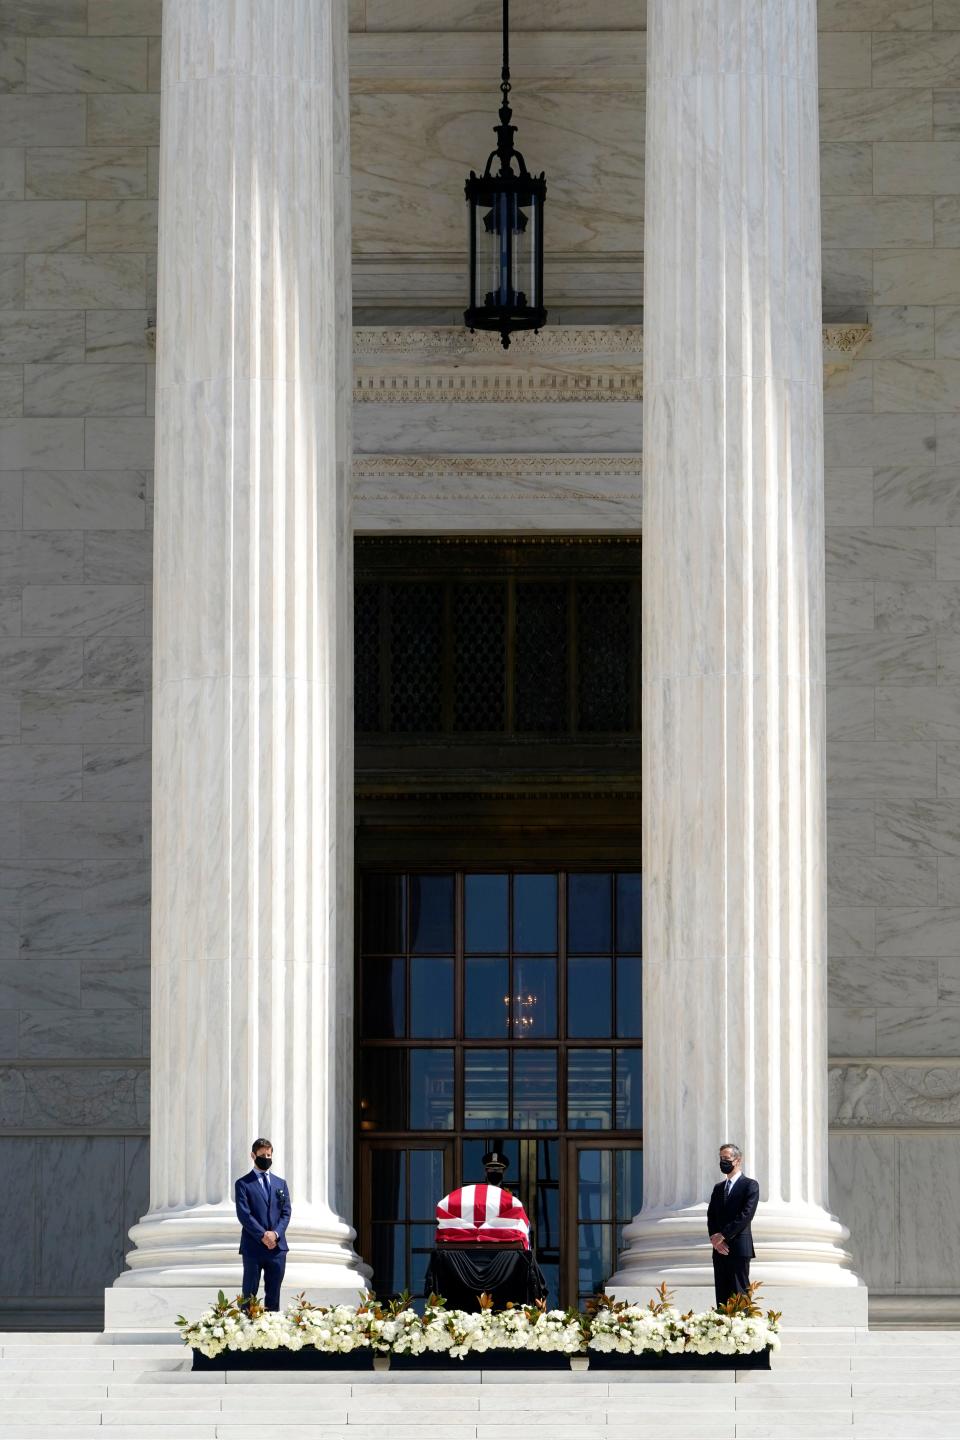 Casket of Justice Ruth Bader Ginsburg at the U.S. Supreme Court Building on Sept. 23, 2020, in Washington, D.C.